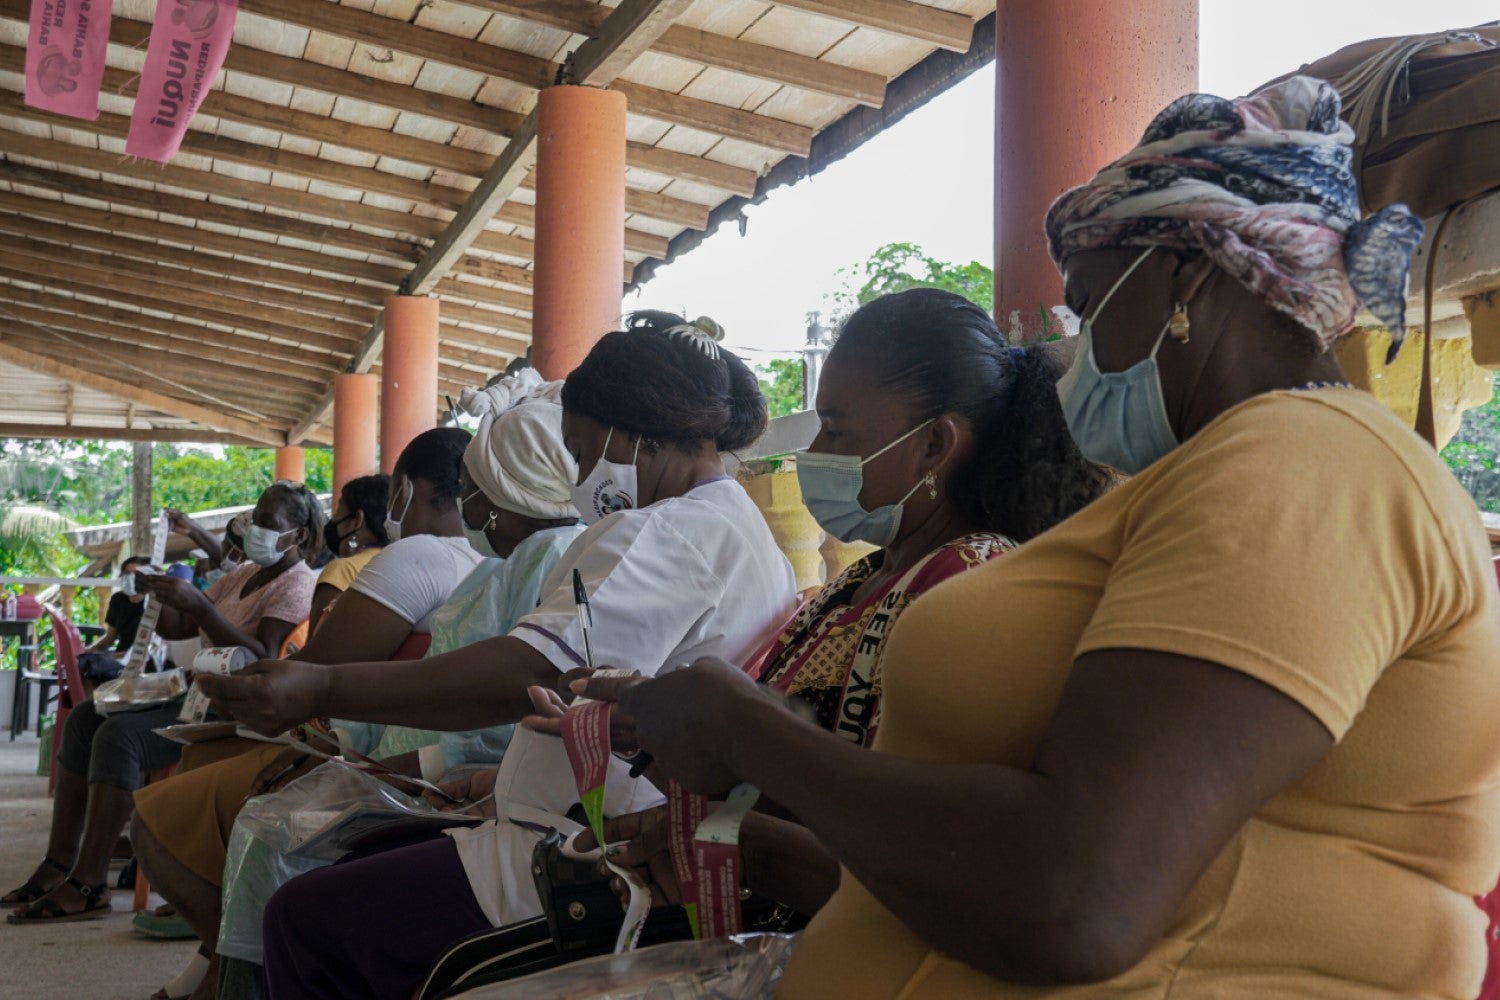 Midwives from Chocó participate in a PAHO training and learn how to use the measurement tape to identify warning signs during pregnancy.